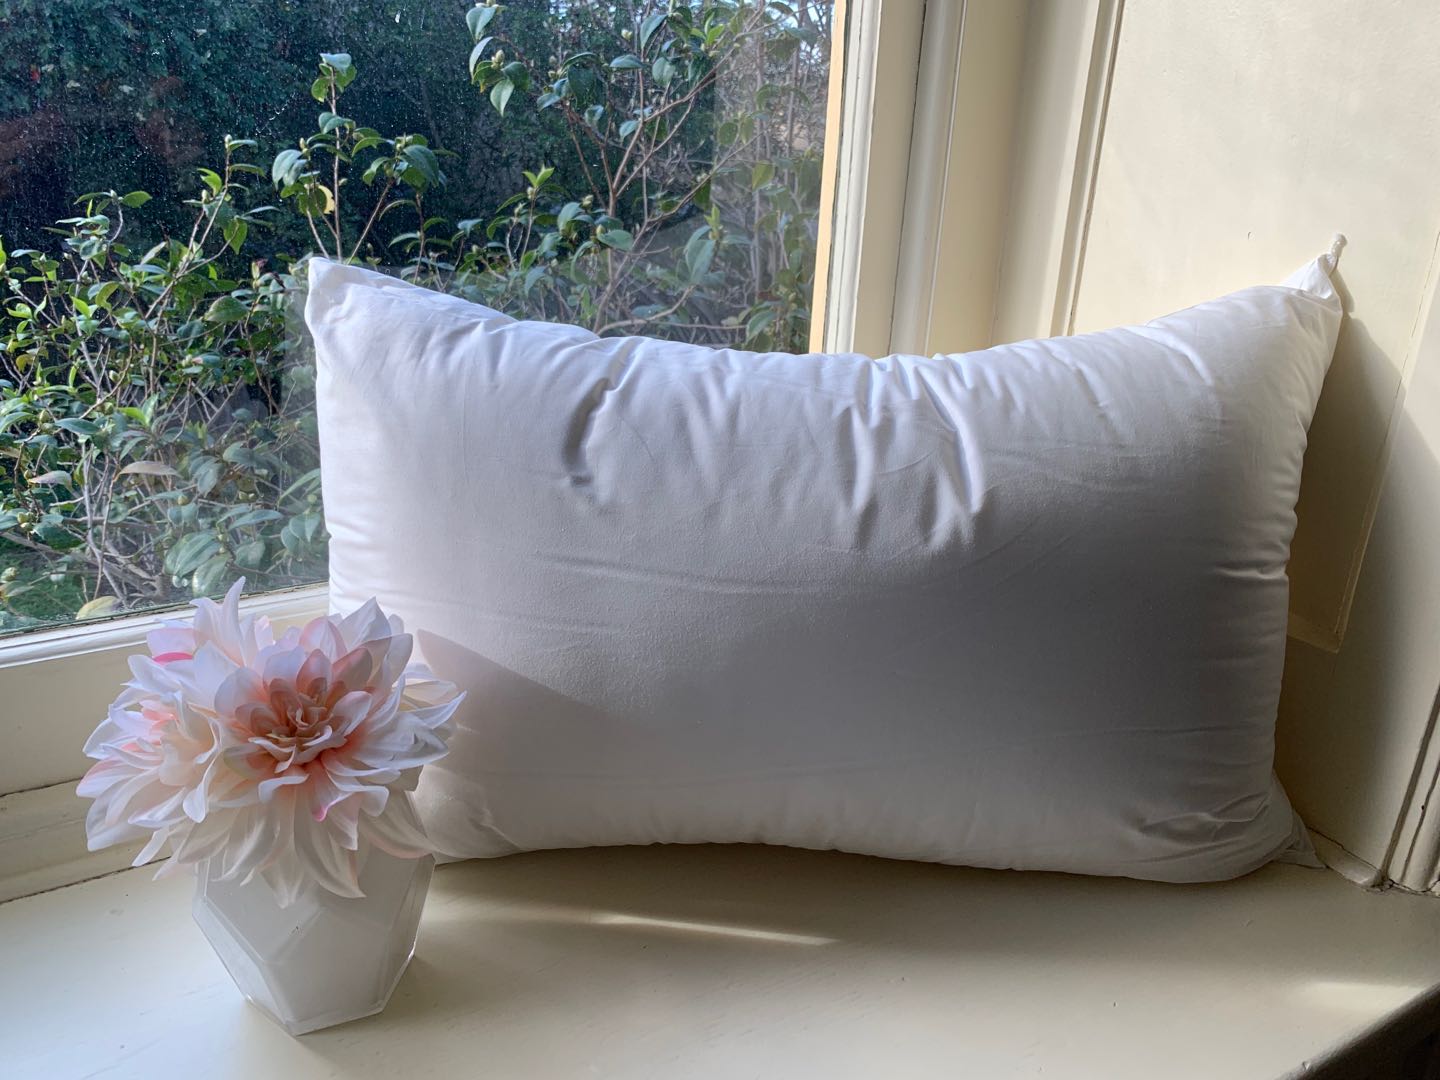 Pillow sitting against a windowsill with pink flowers nearby.